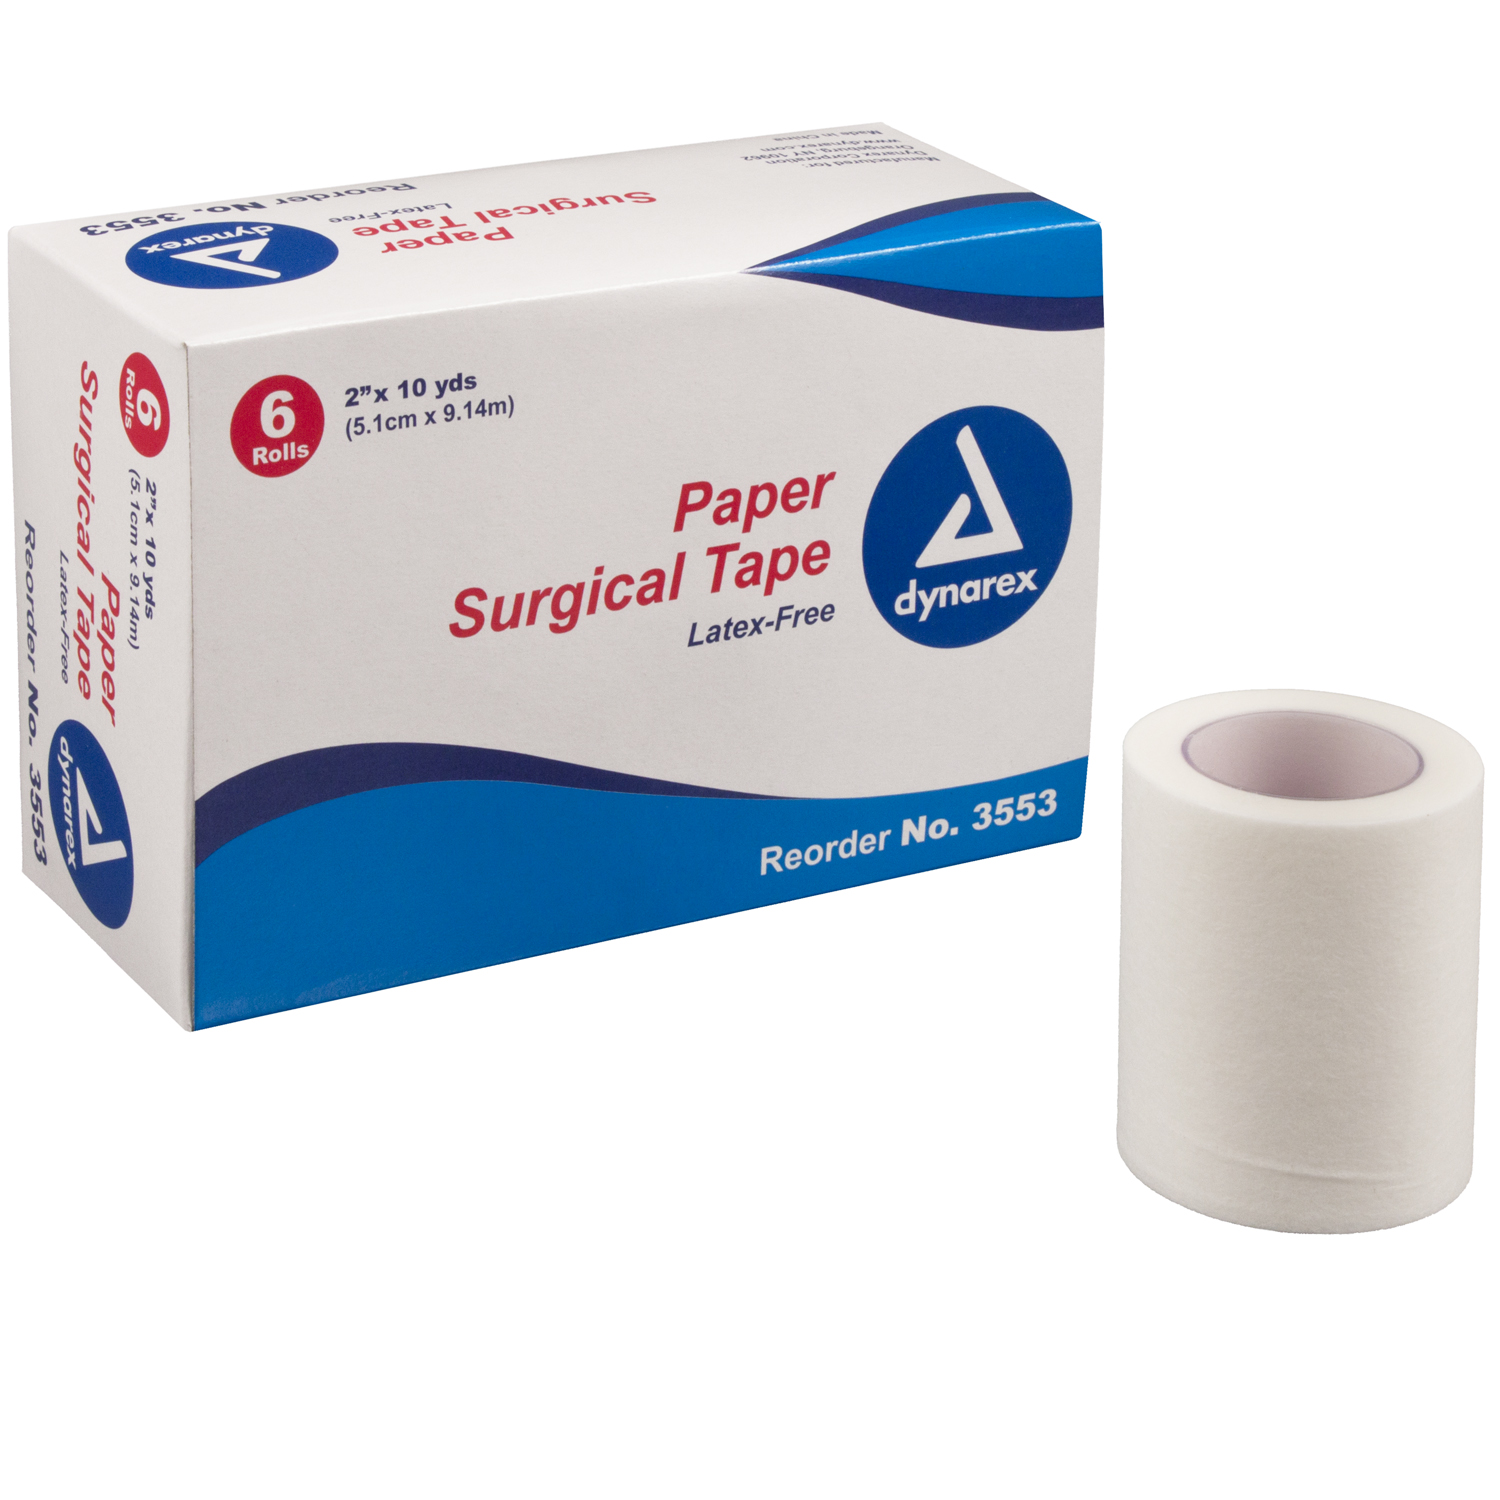 Paper Surgical Tape - 2" x 10 yds